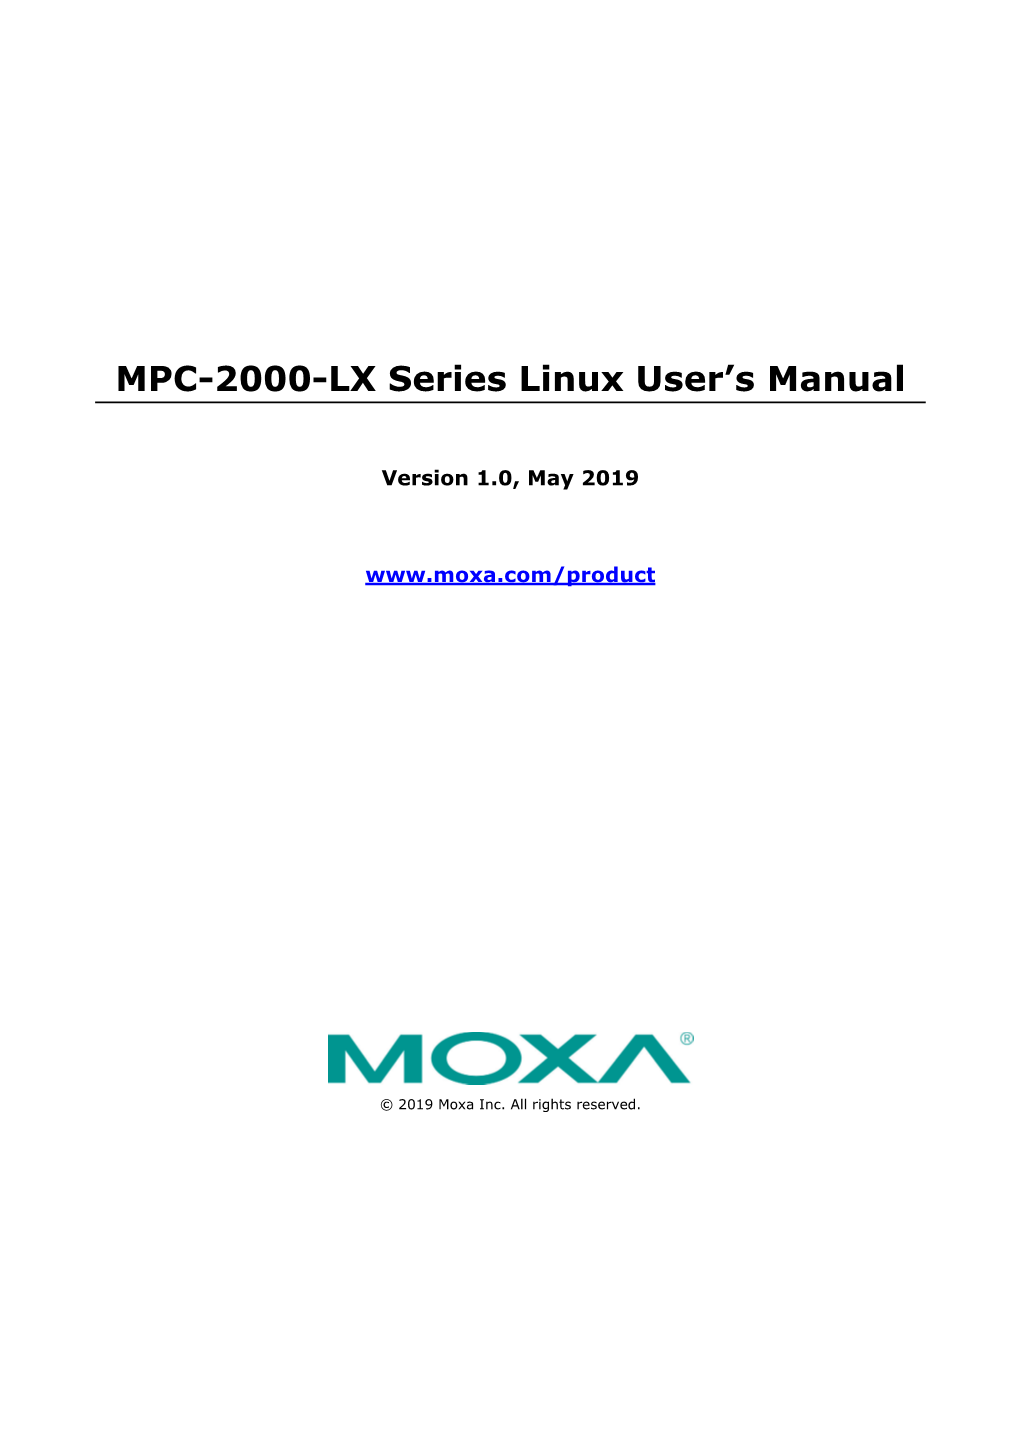 MPC-2000-LX Series Linux User's Manual